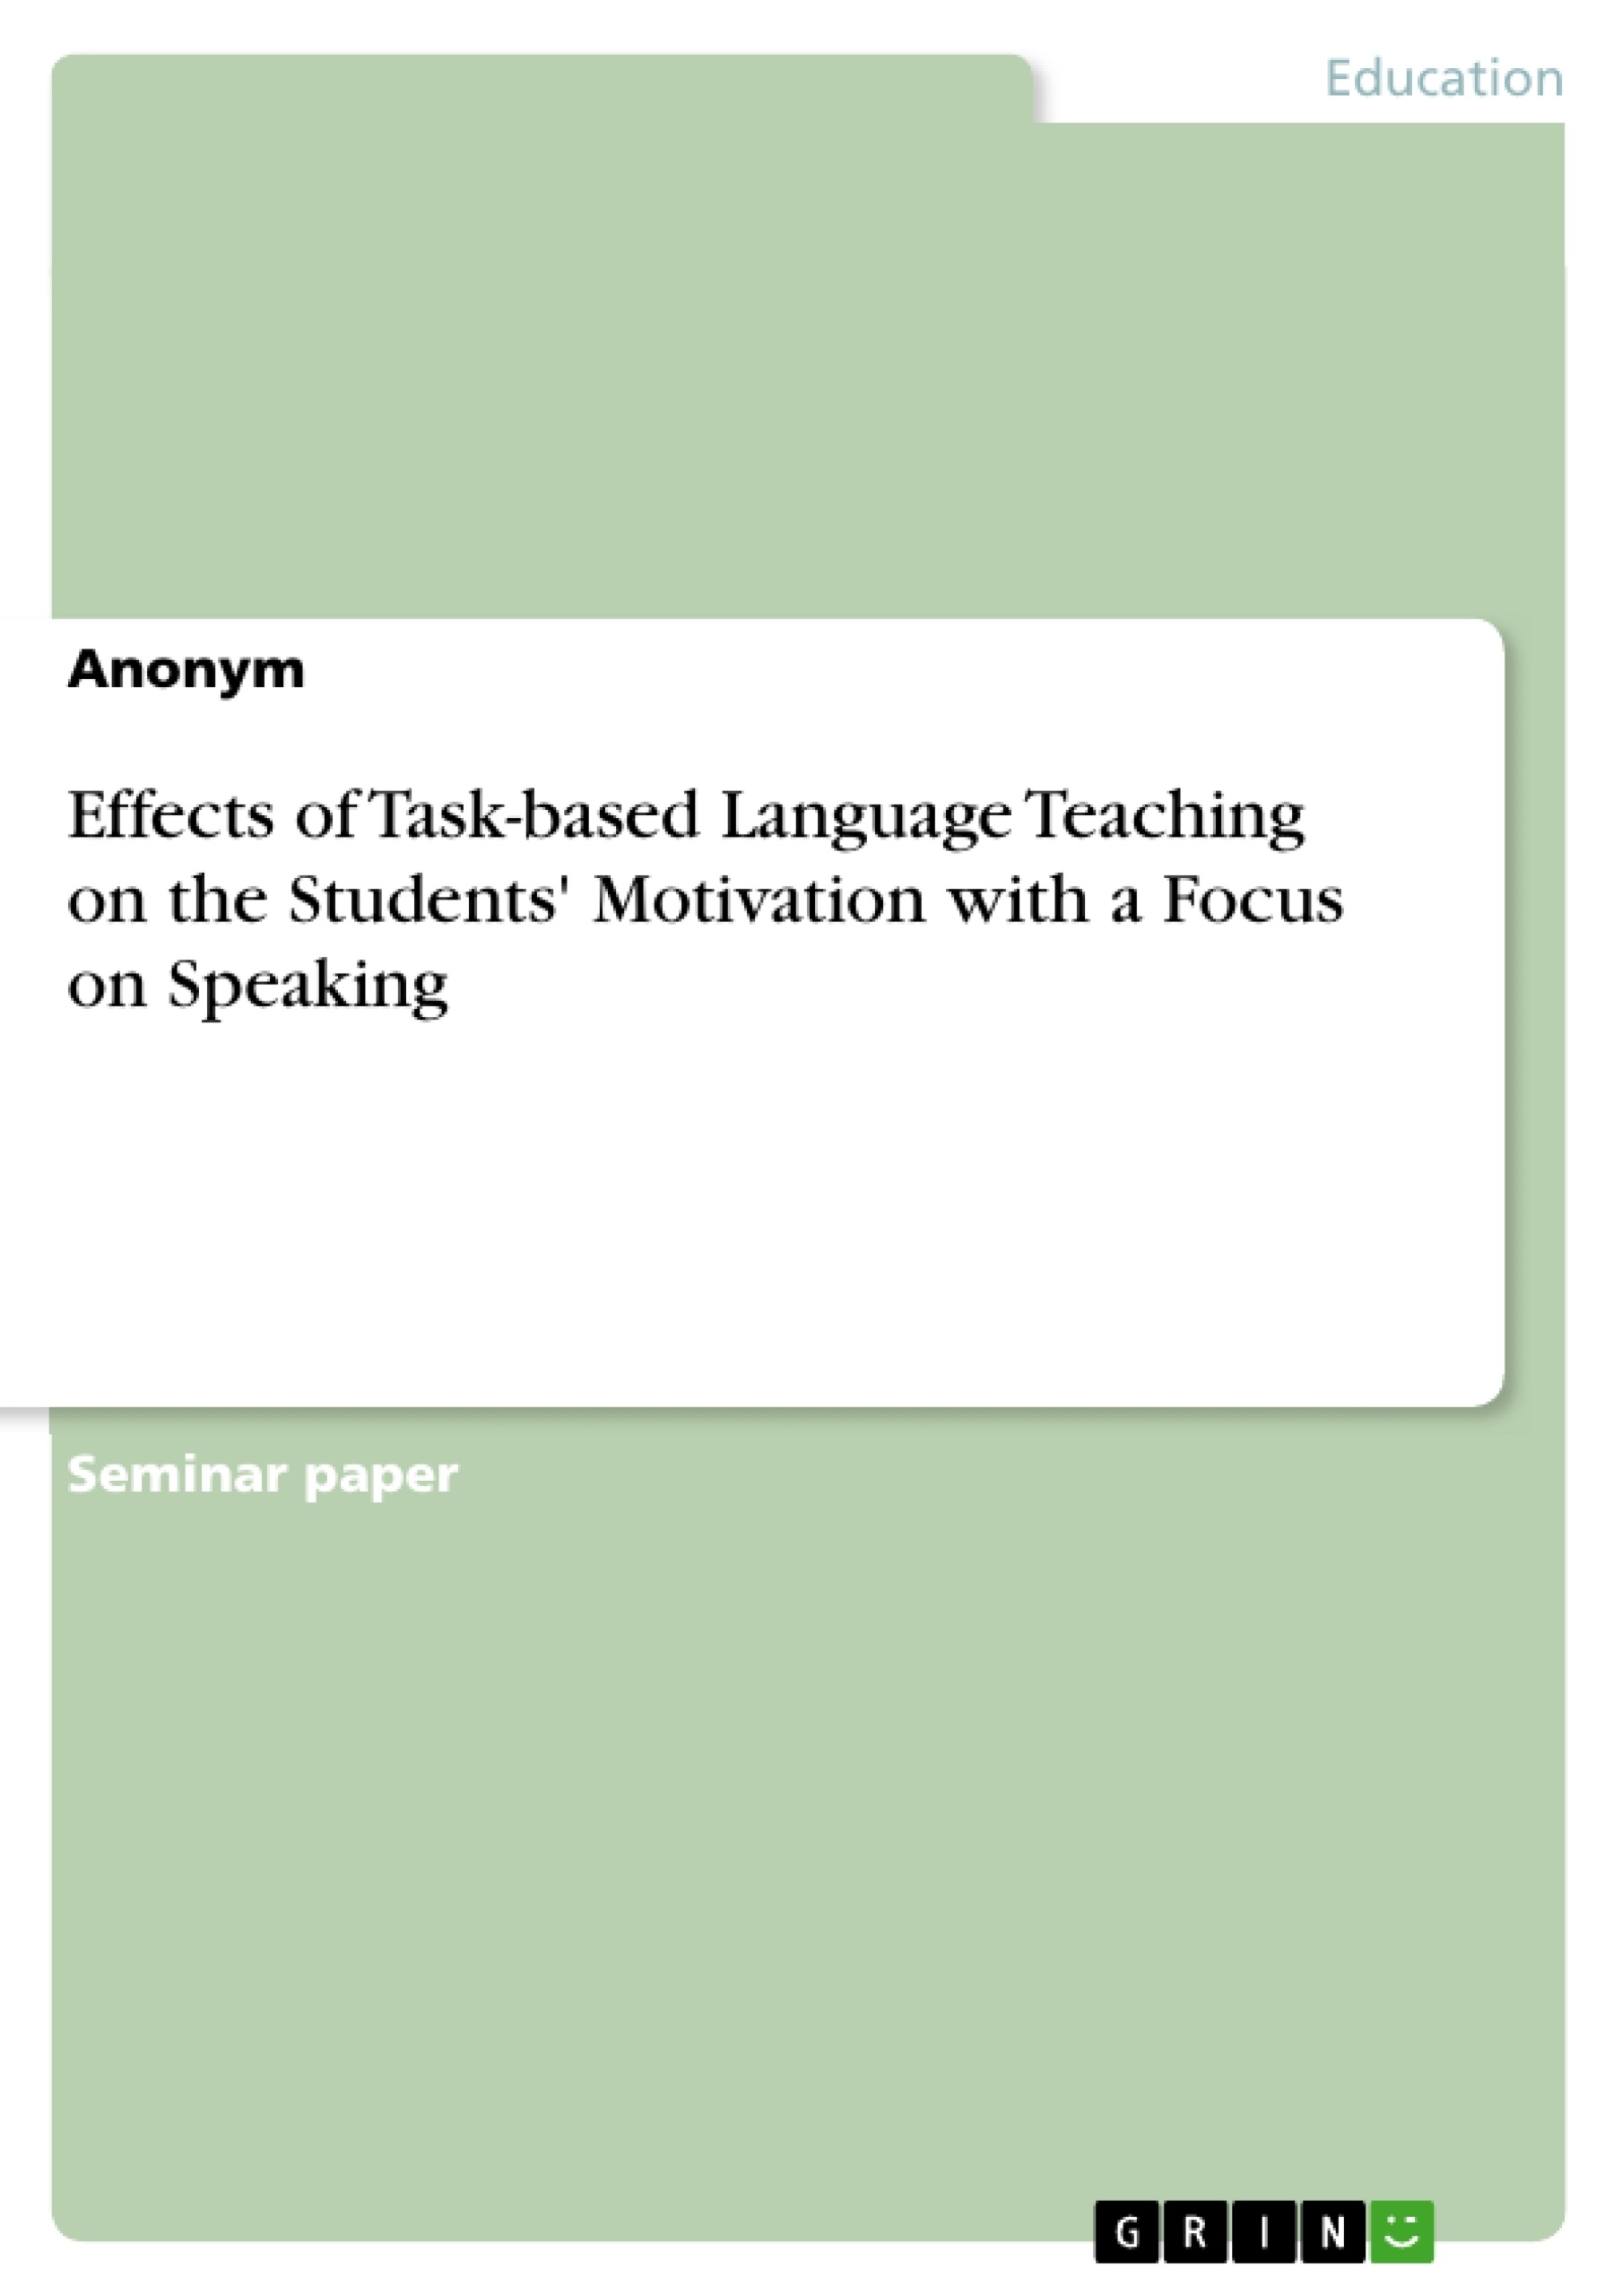 Title: Effects of Task-based Language Teaching on the Students' Motivation with a Focus on Speaking